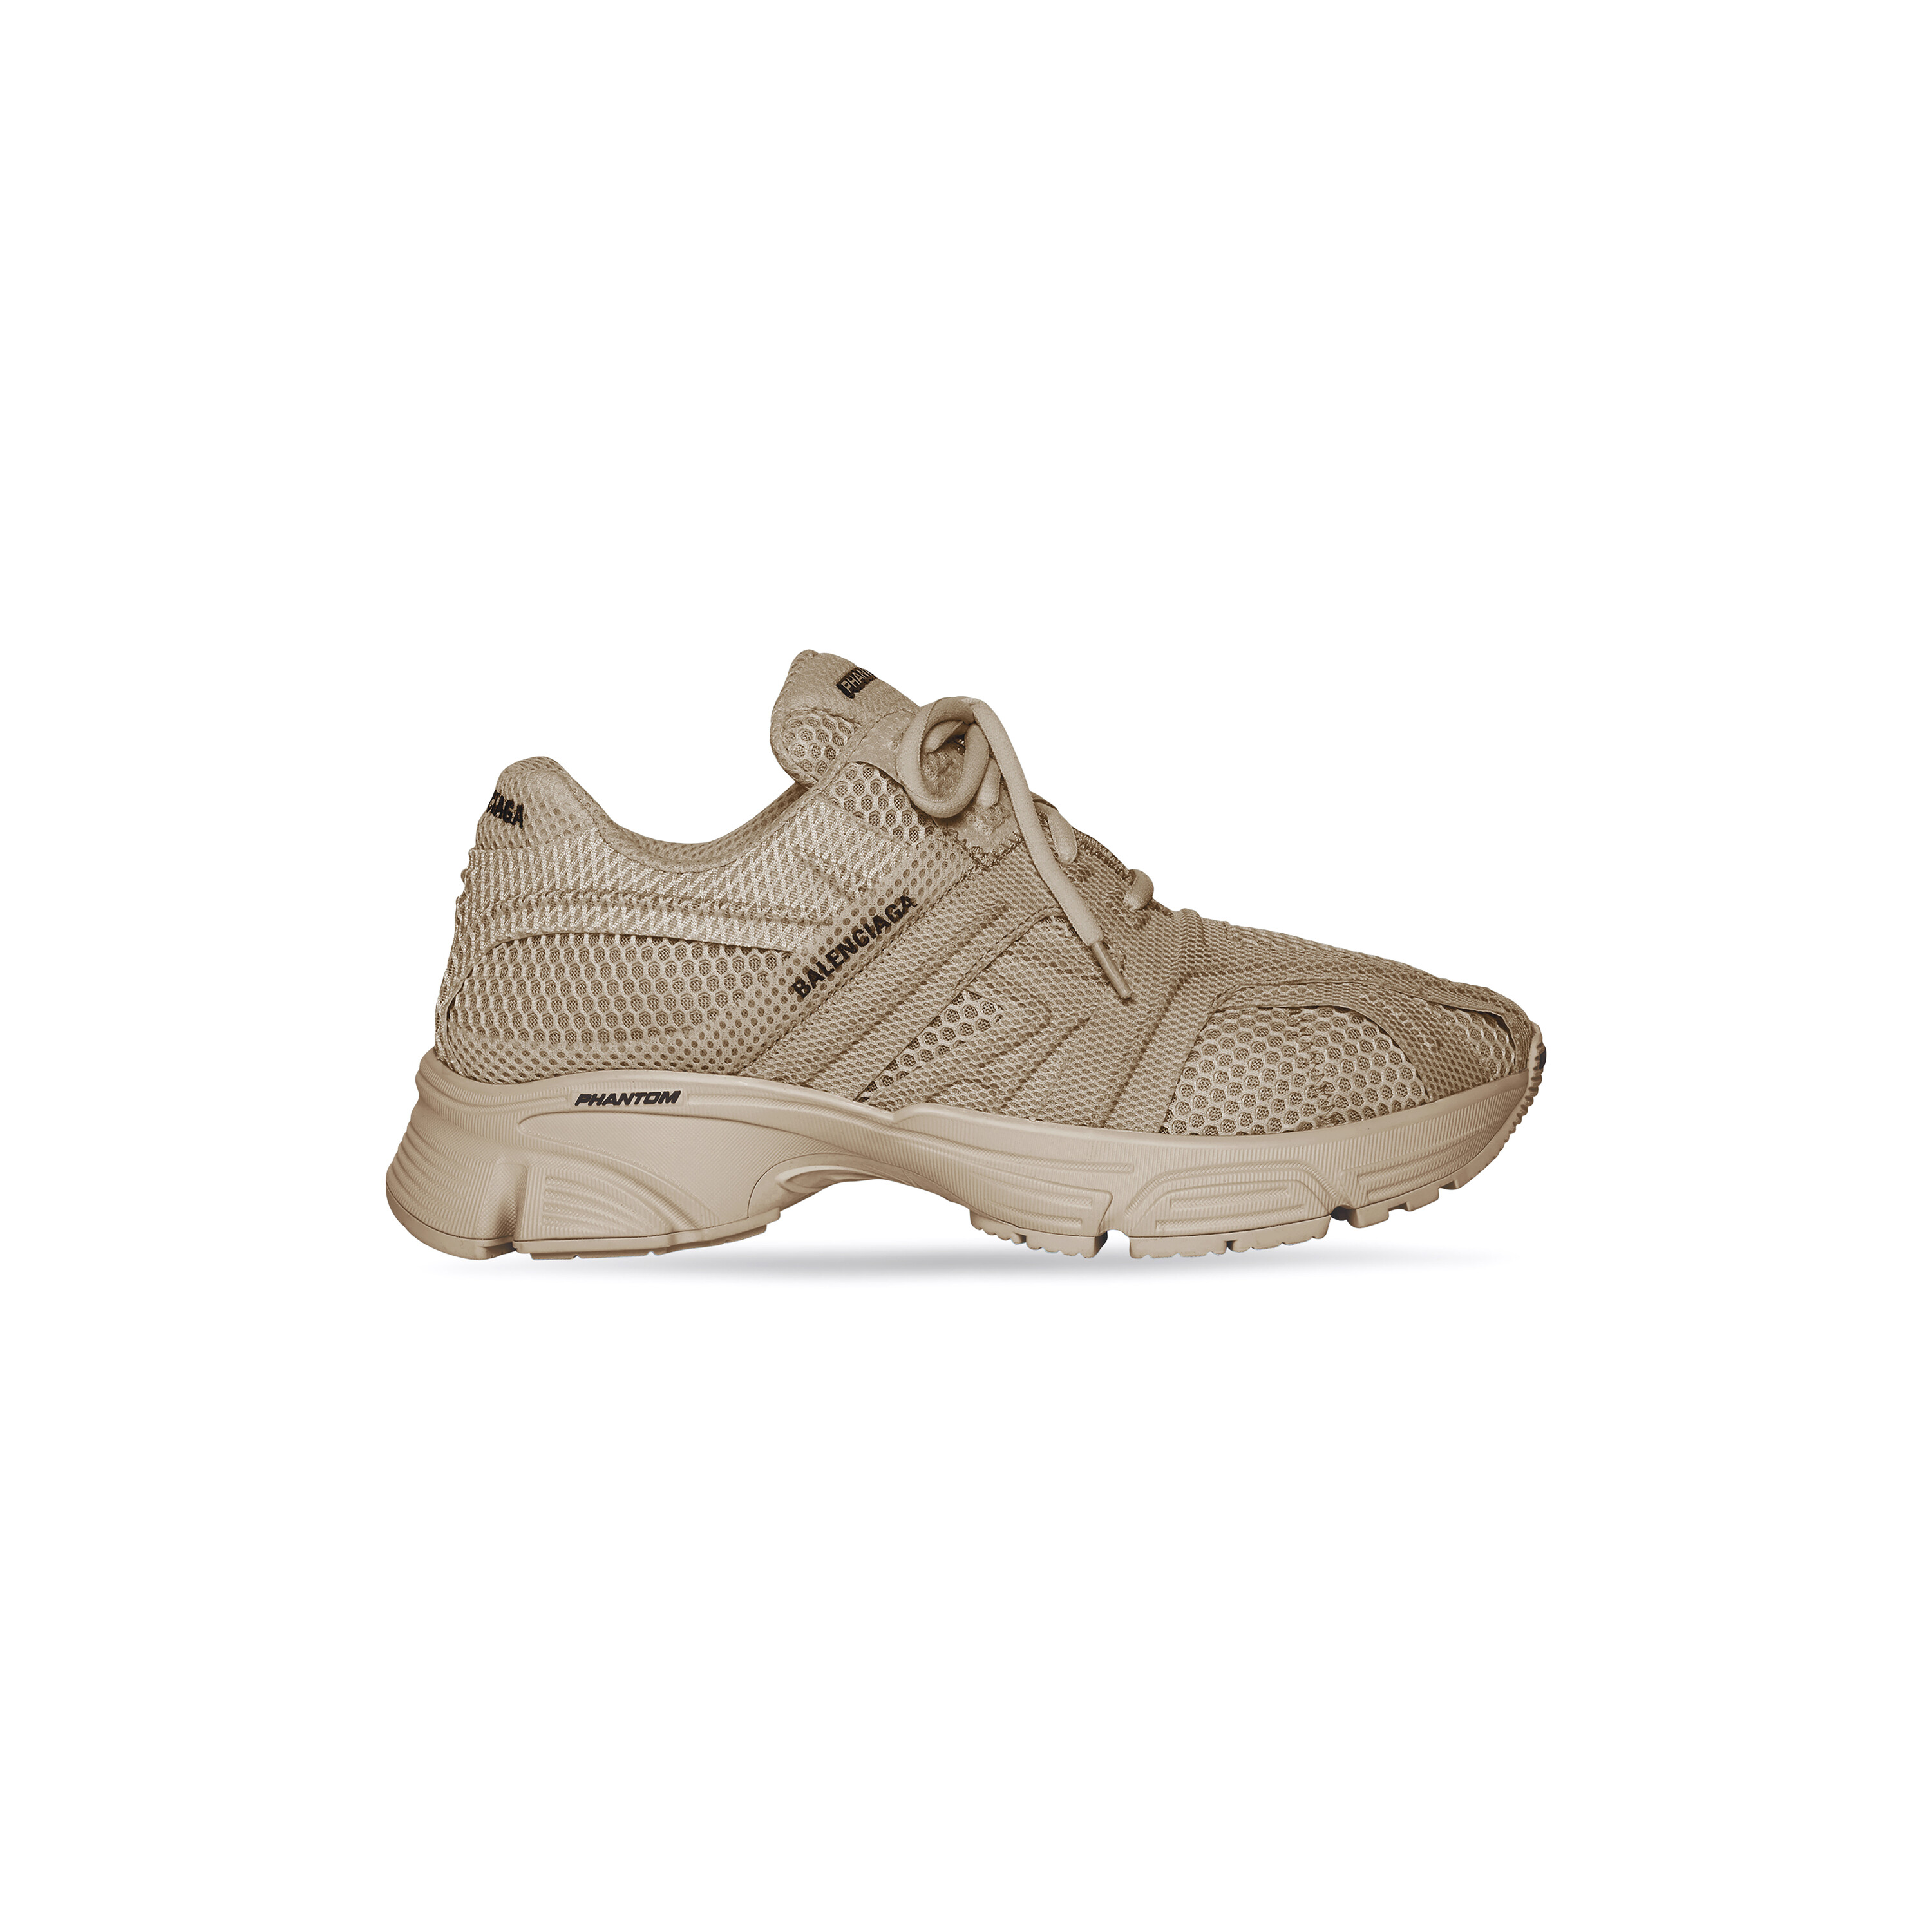 Brown Speed 20 Sneakers by Balenciaga on Sale